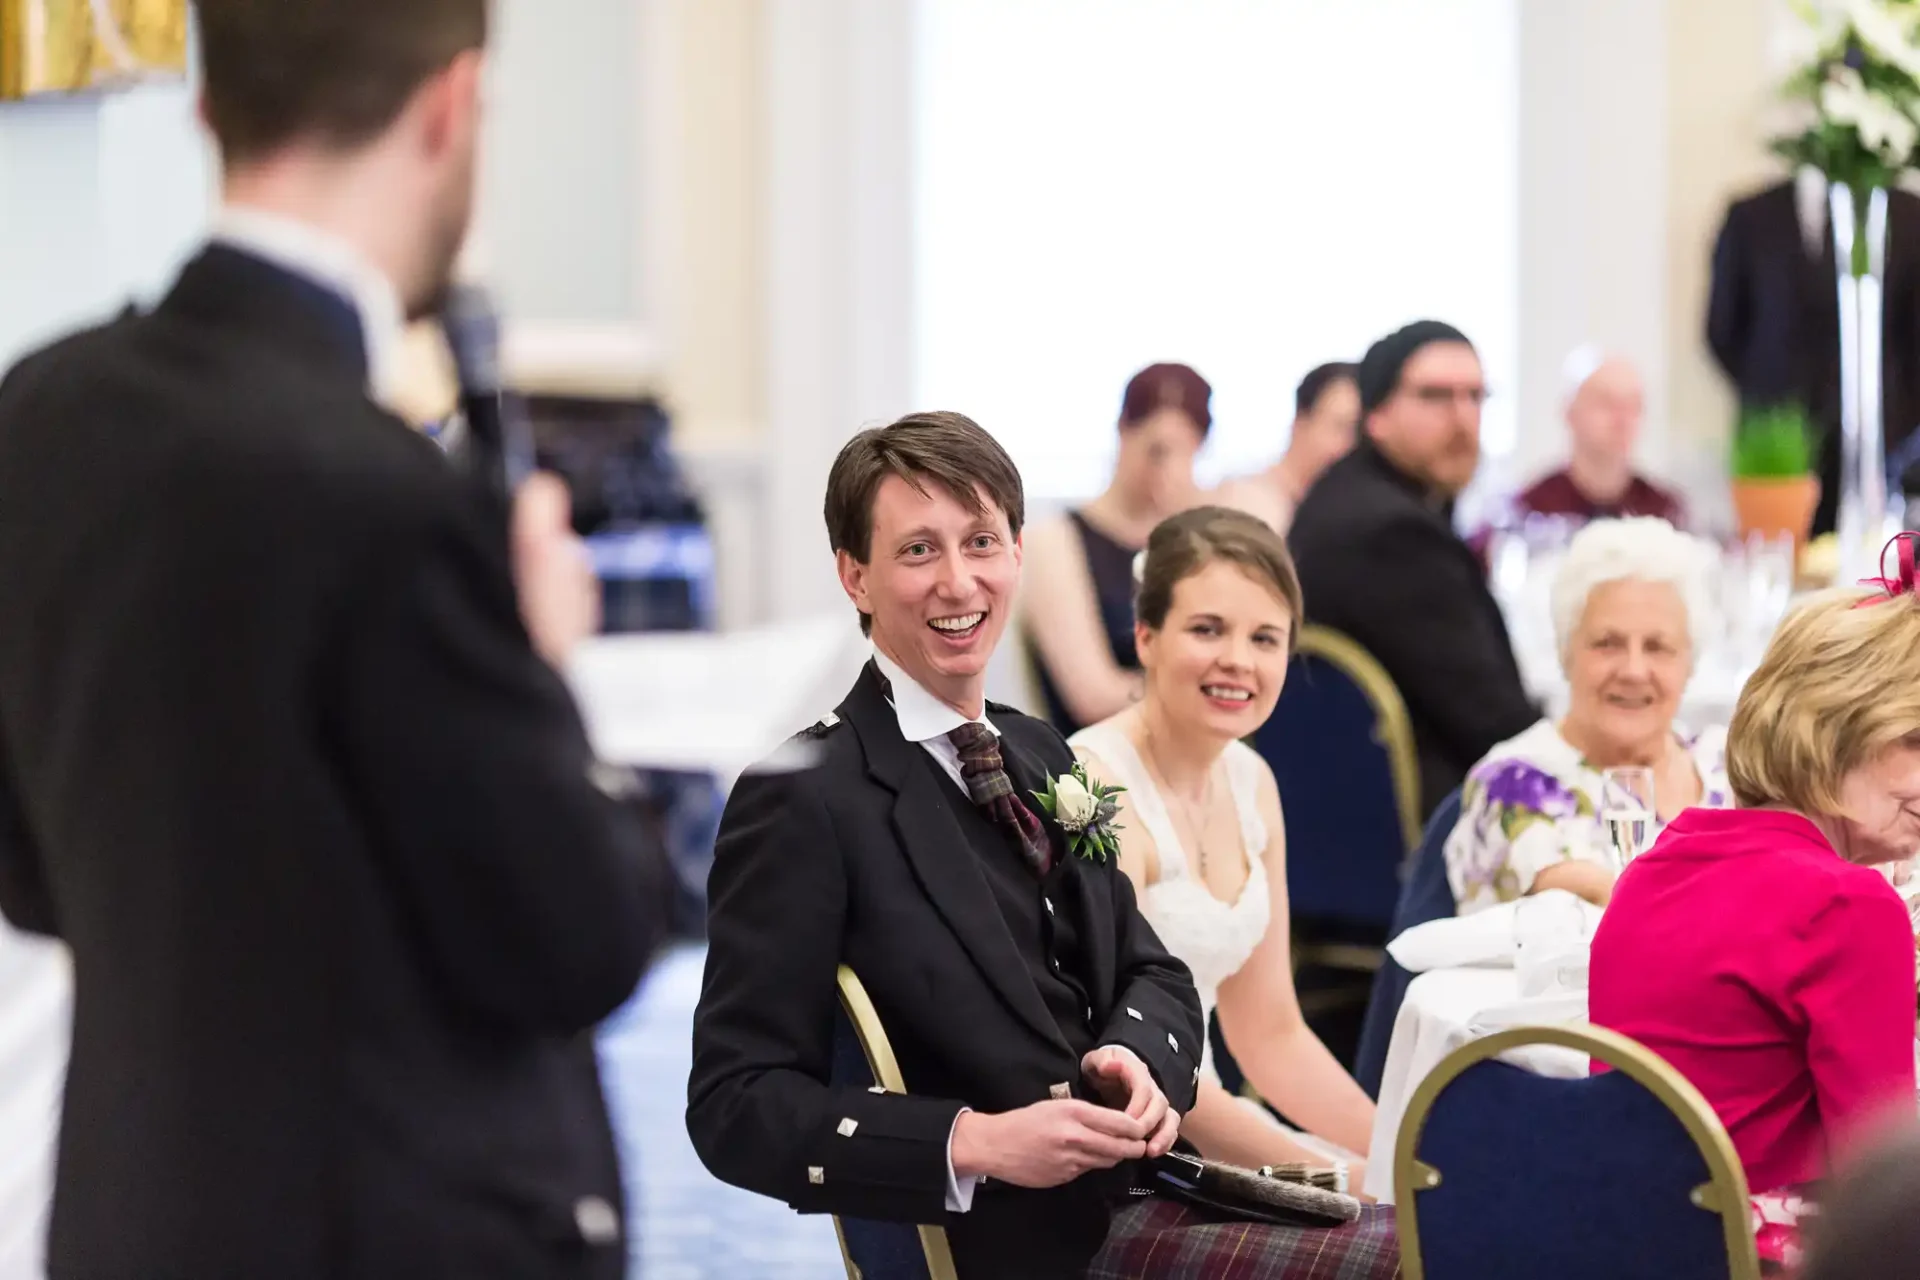 A smiling groom in a suit with a boutonniere holds a microphone, seated next to a bride in a hall filled with guests.